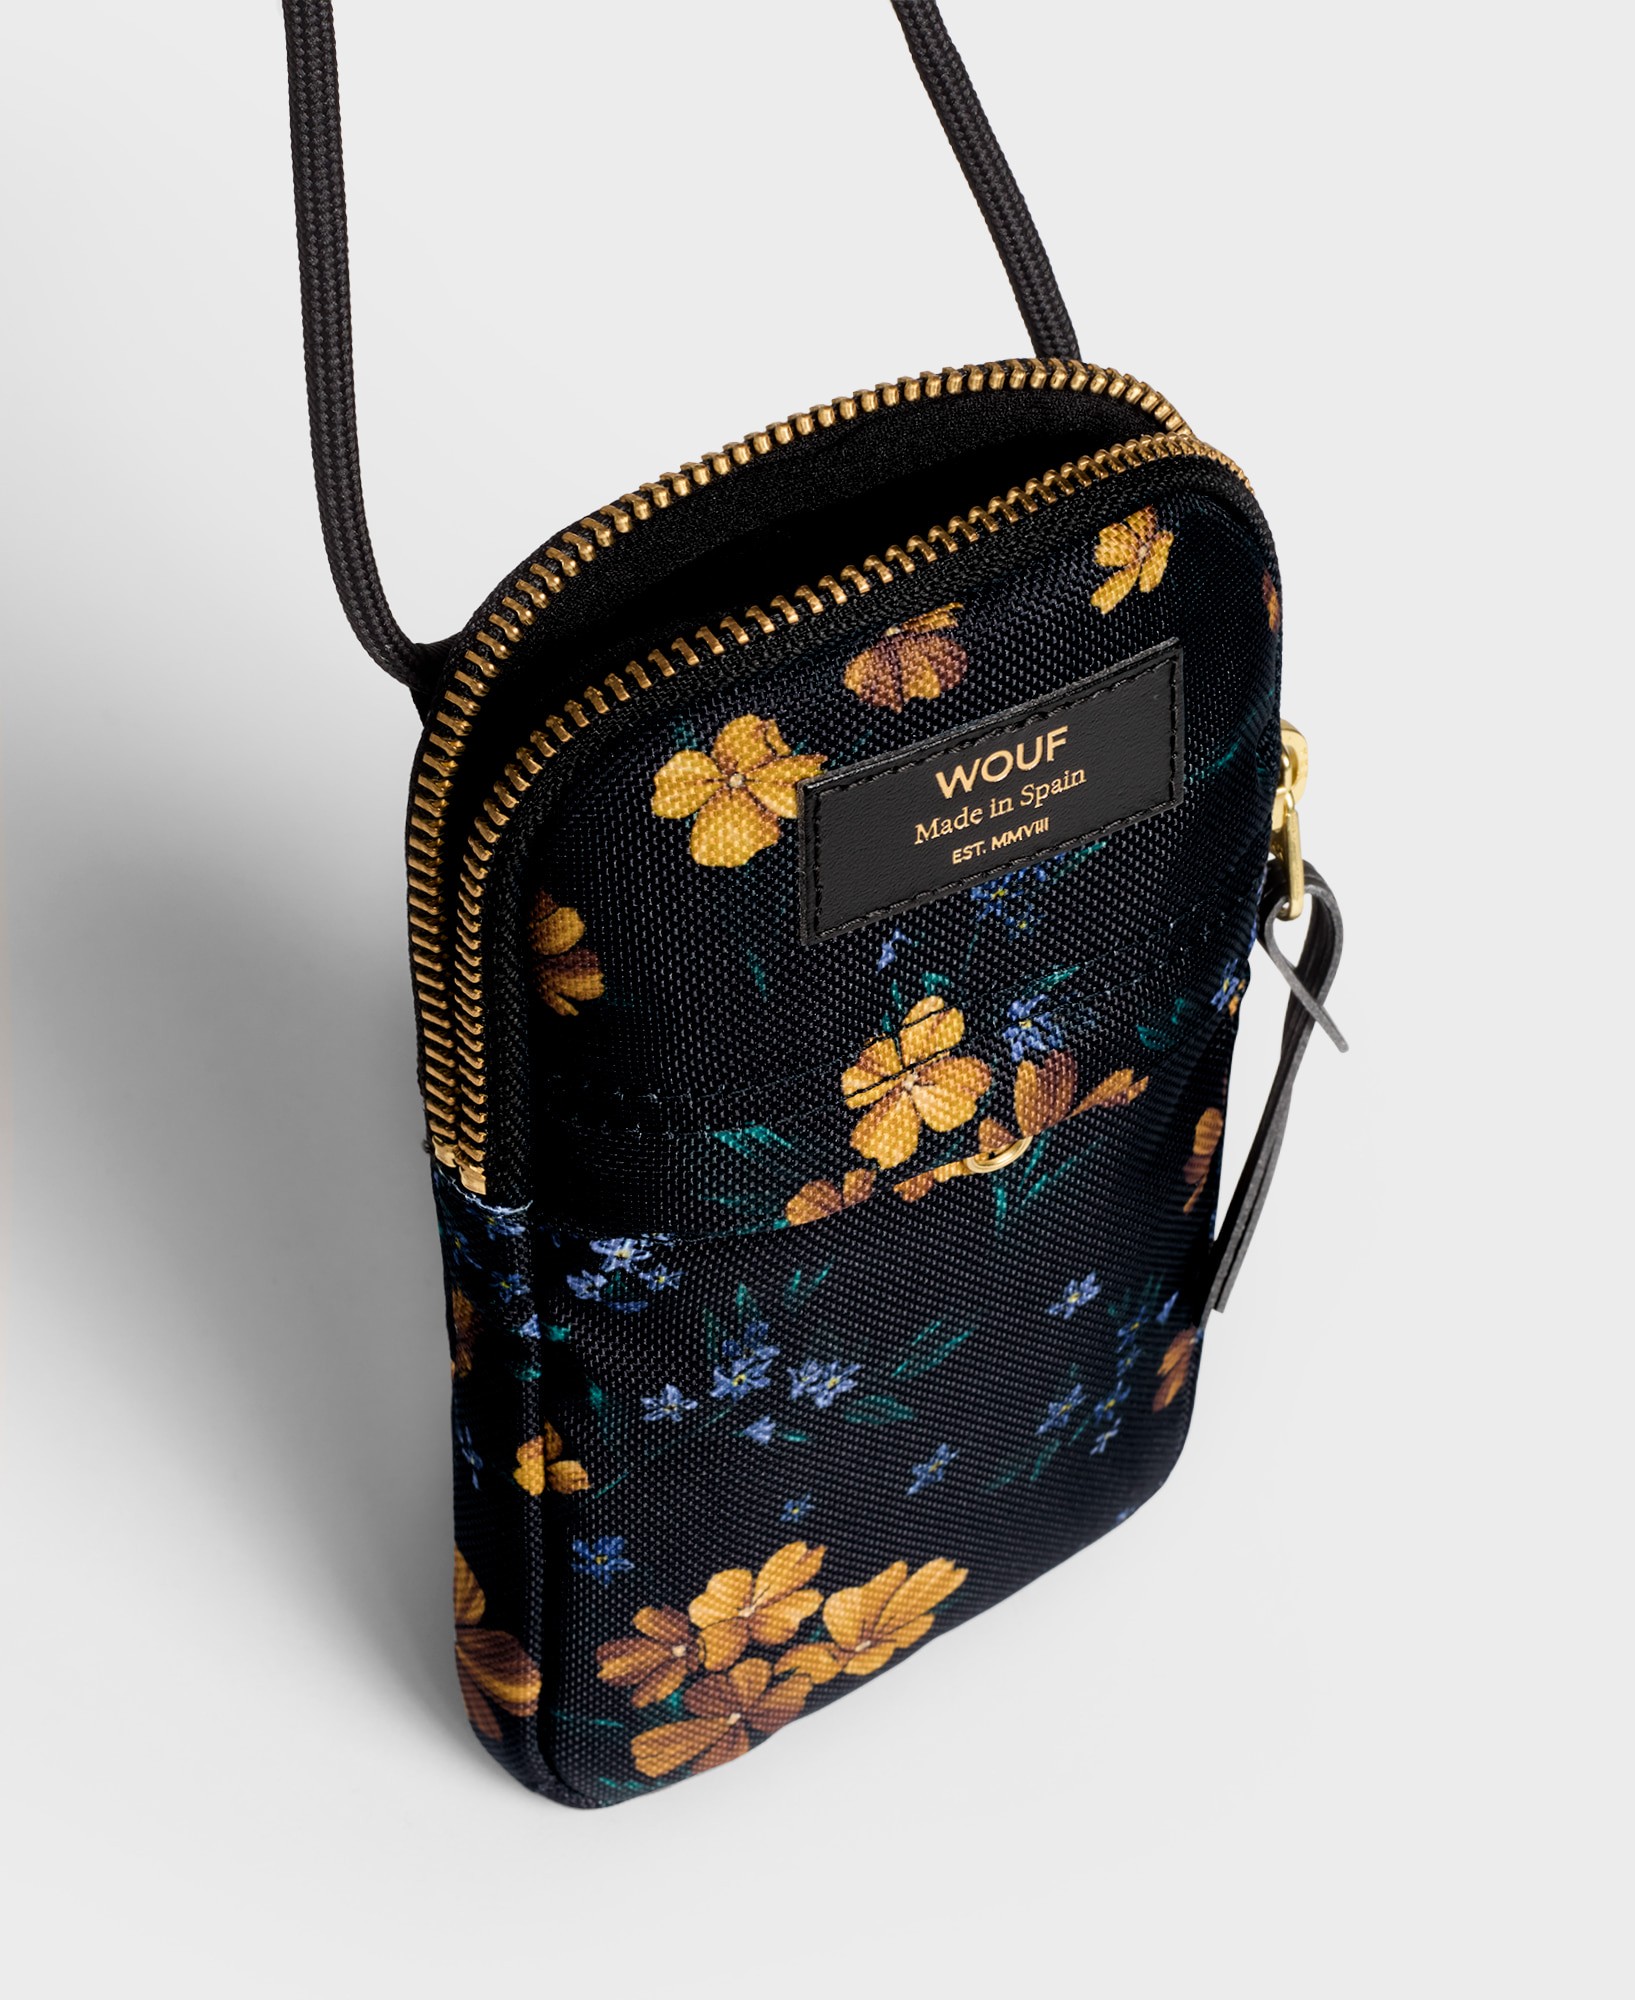 https://images.logicommerce.cloud/92/products/WOUF-PB220011-Phone-Bag-Adele-Detail_adl.jpg